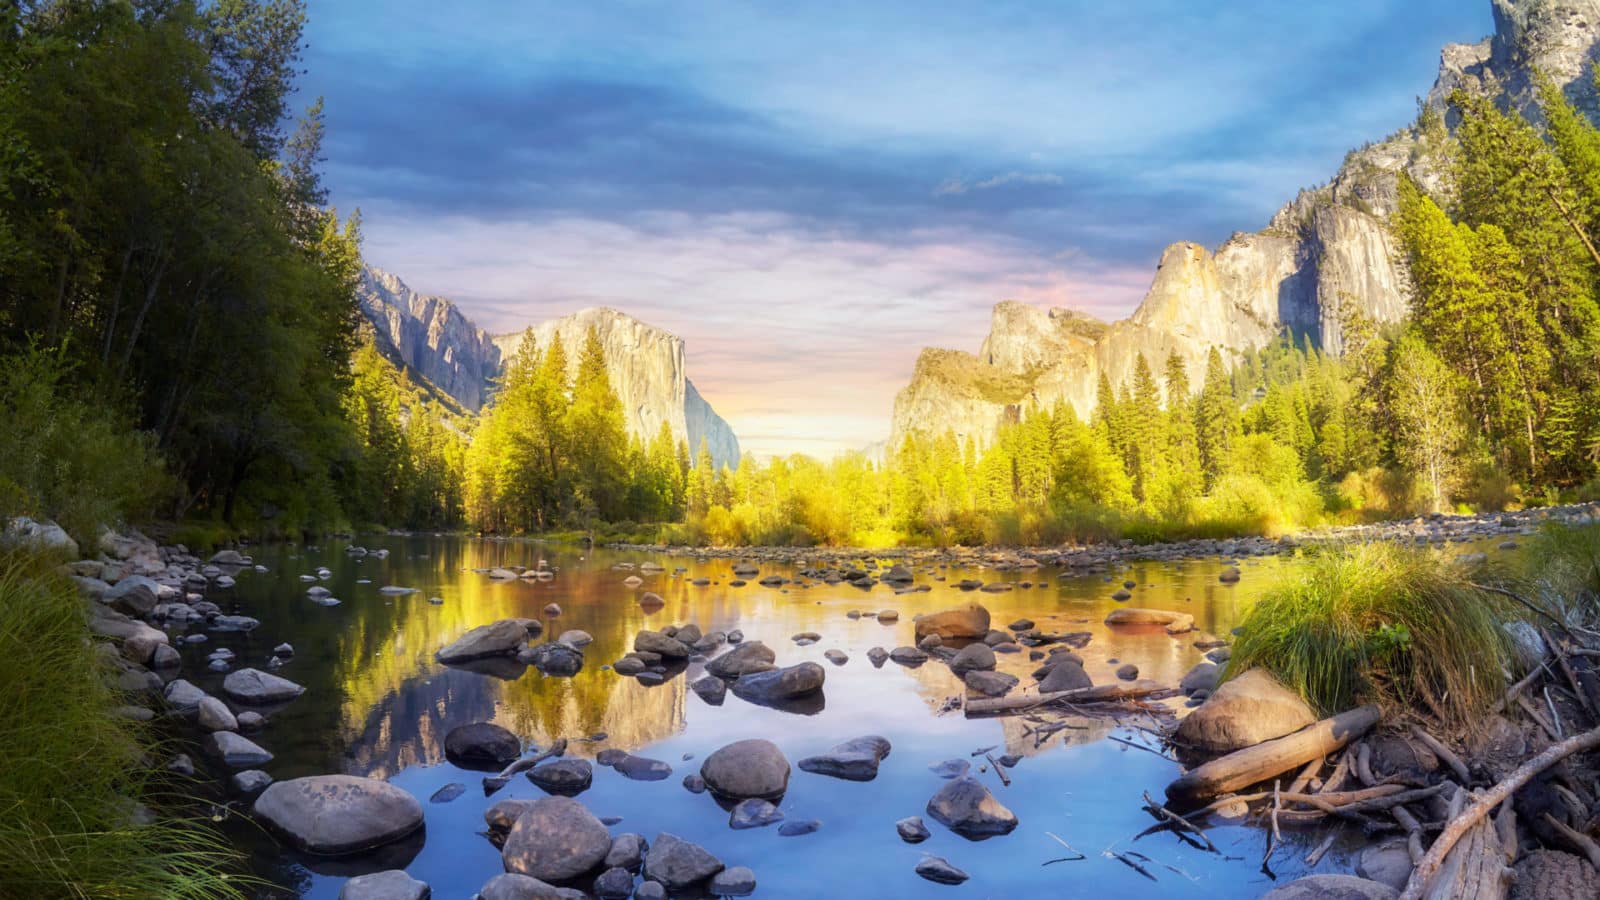 Yosemite Valley at sunset as seen from the Merced River